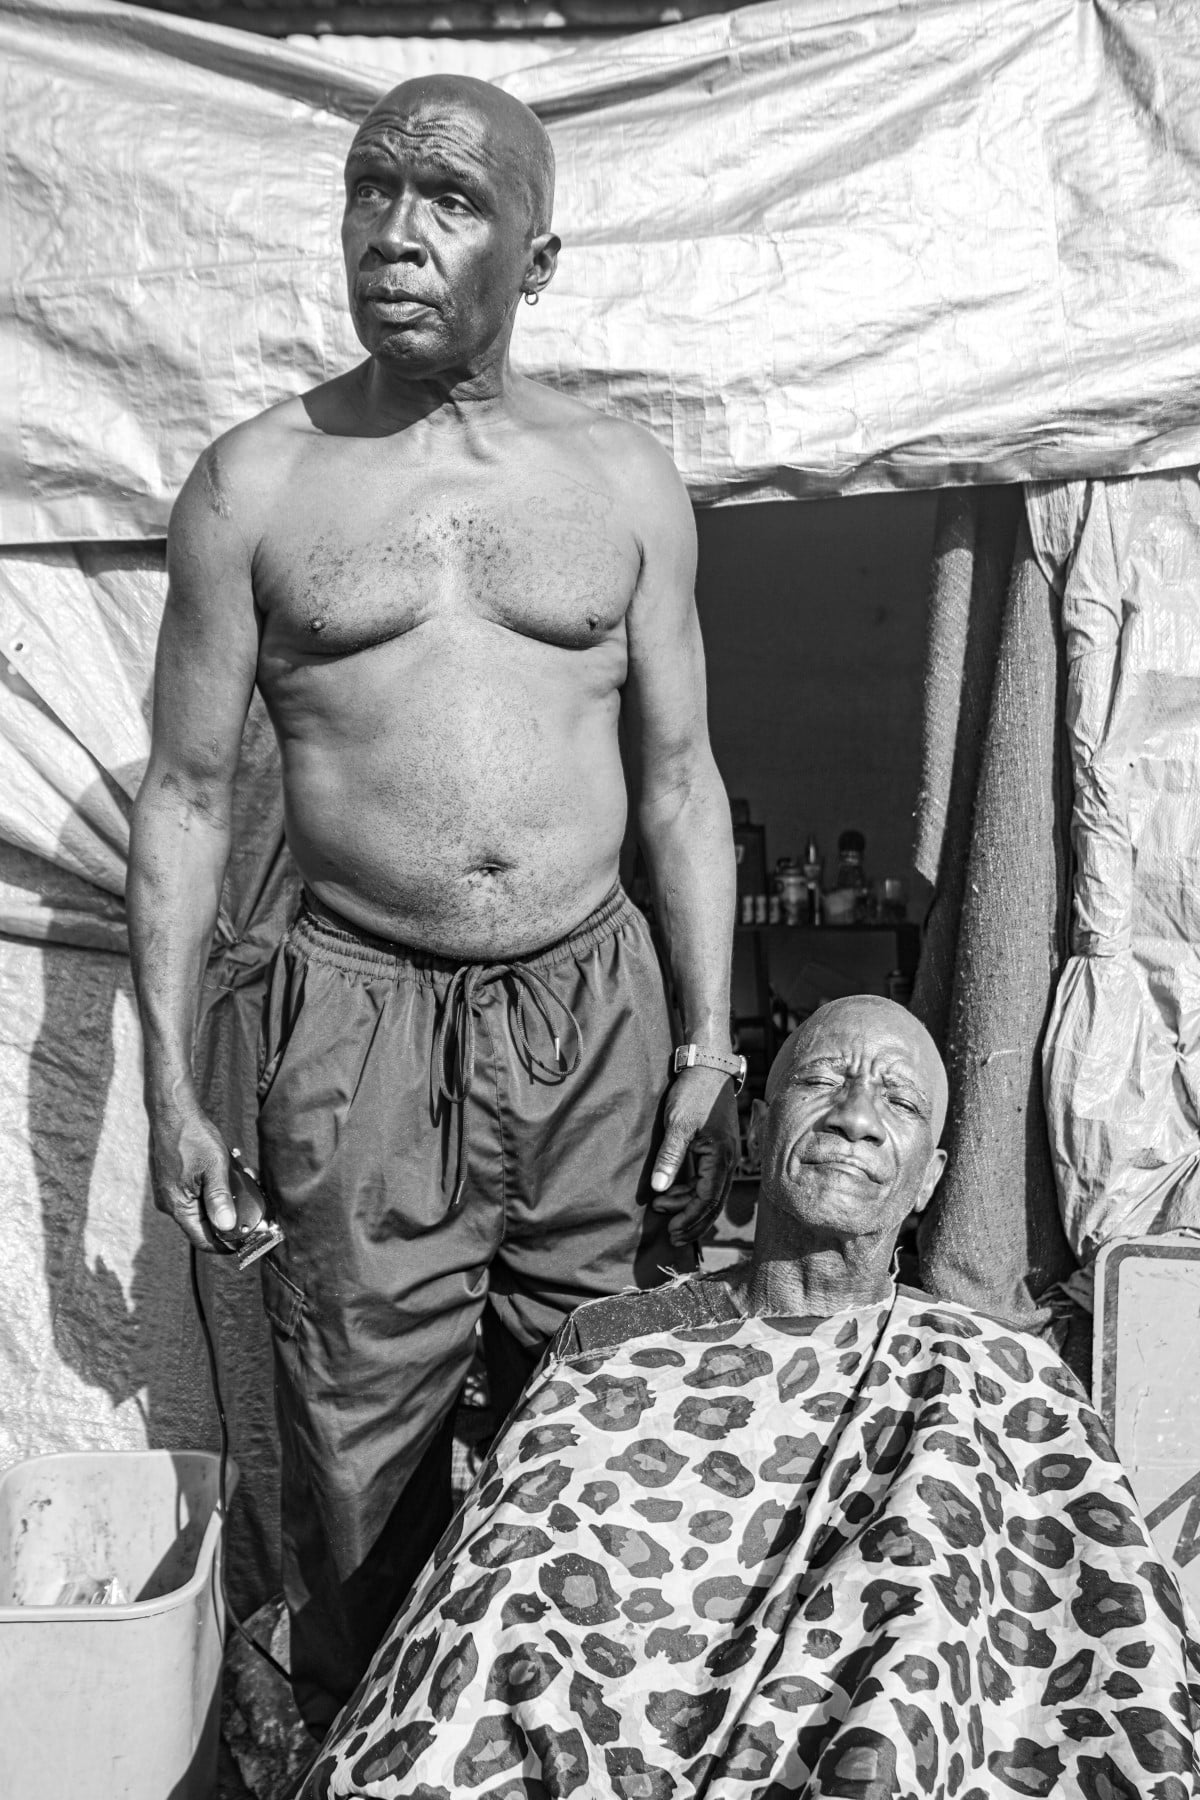 Black and white portraits of Skid Row by Suitcase Joe